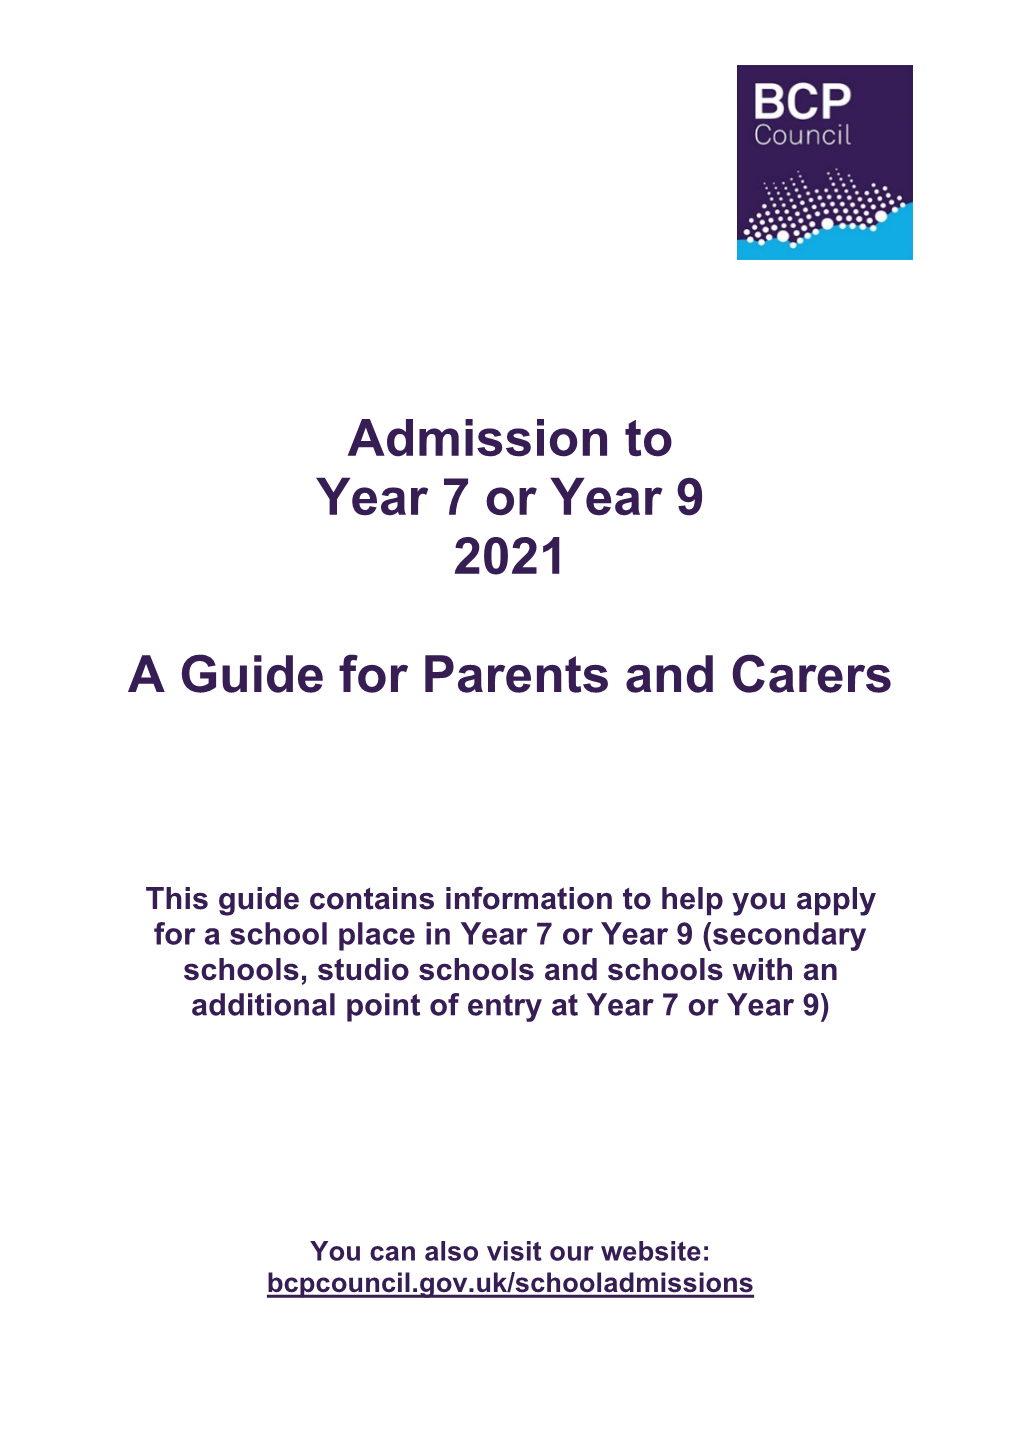 Admission to Year 7 Or Year 9 2021 a Guide for Parents and Carers